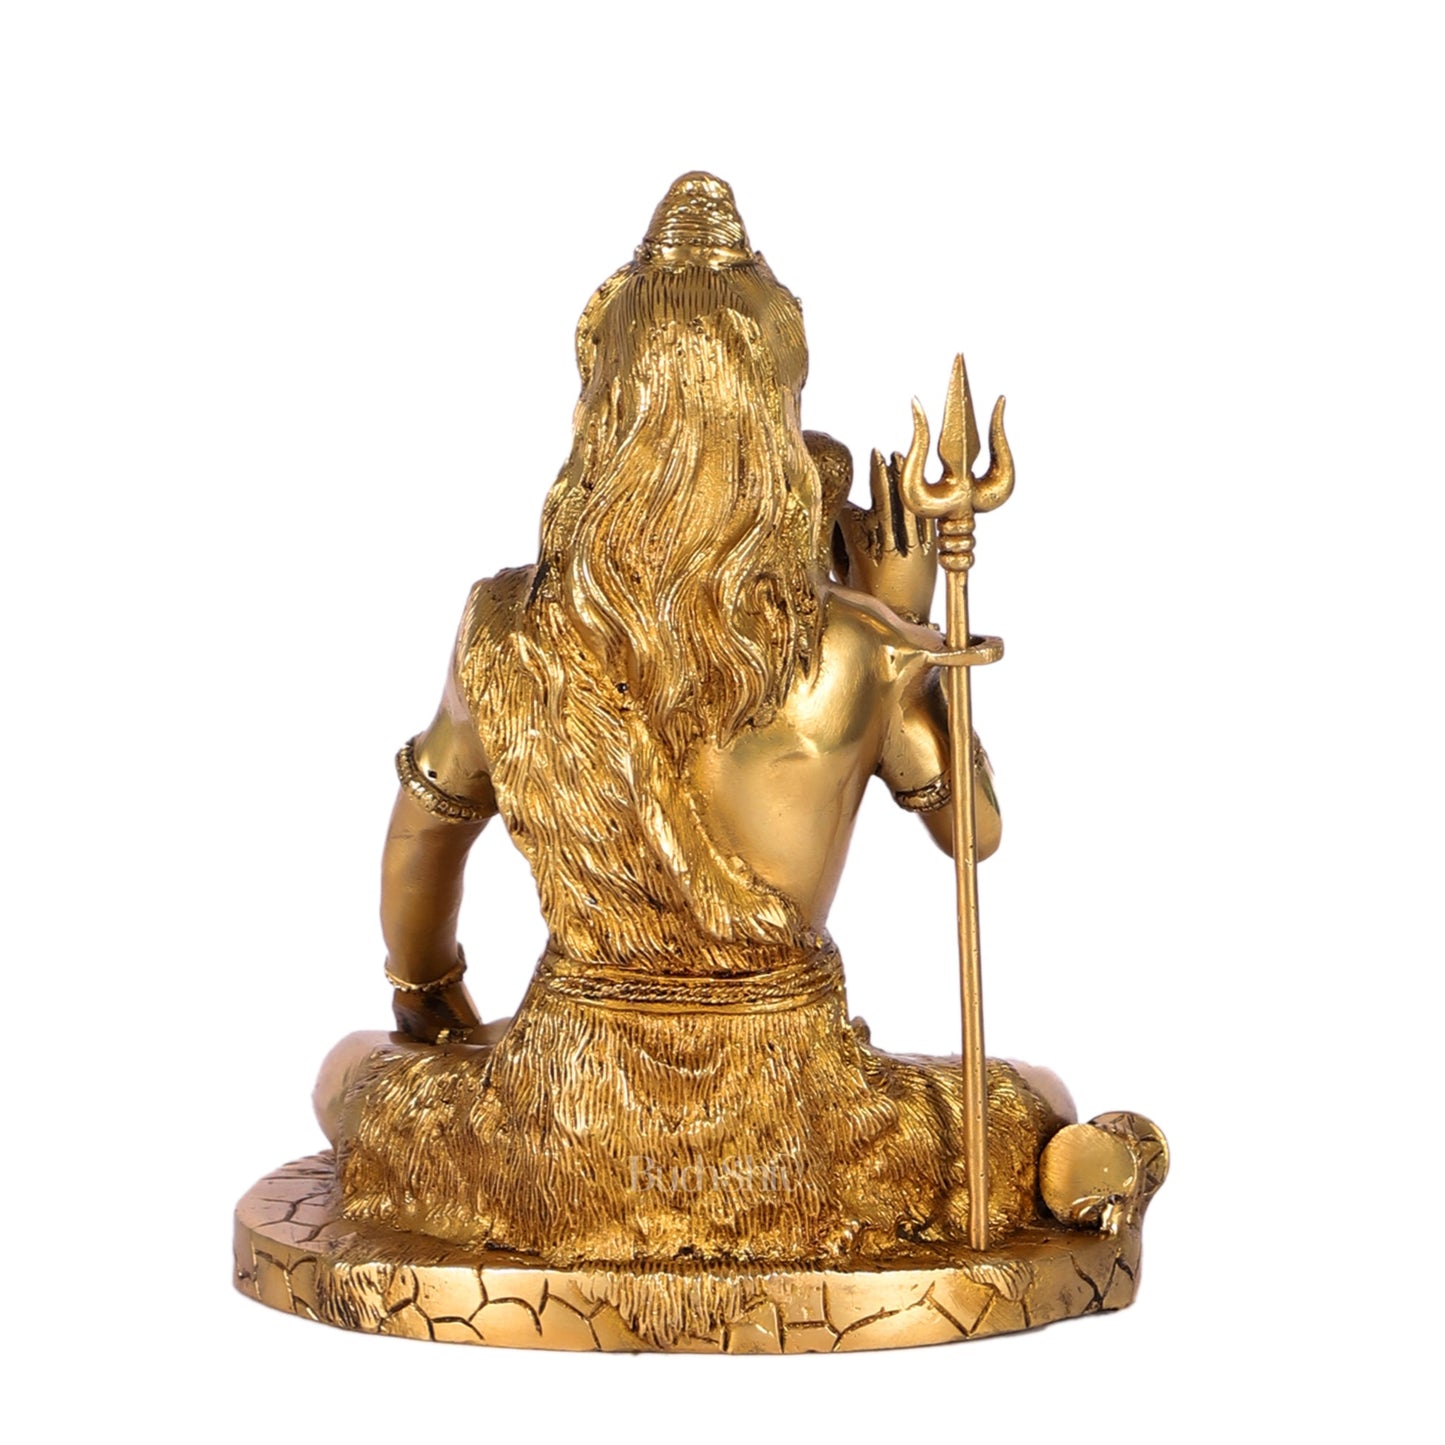 Brass Handcrafted Lord Shiva Statue | Finely Crafted with Sharp Detailing | 9.5" Height" - Budhshiv.com